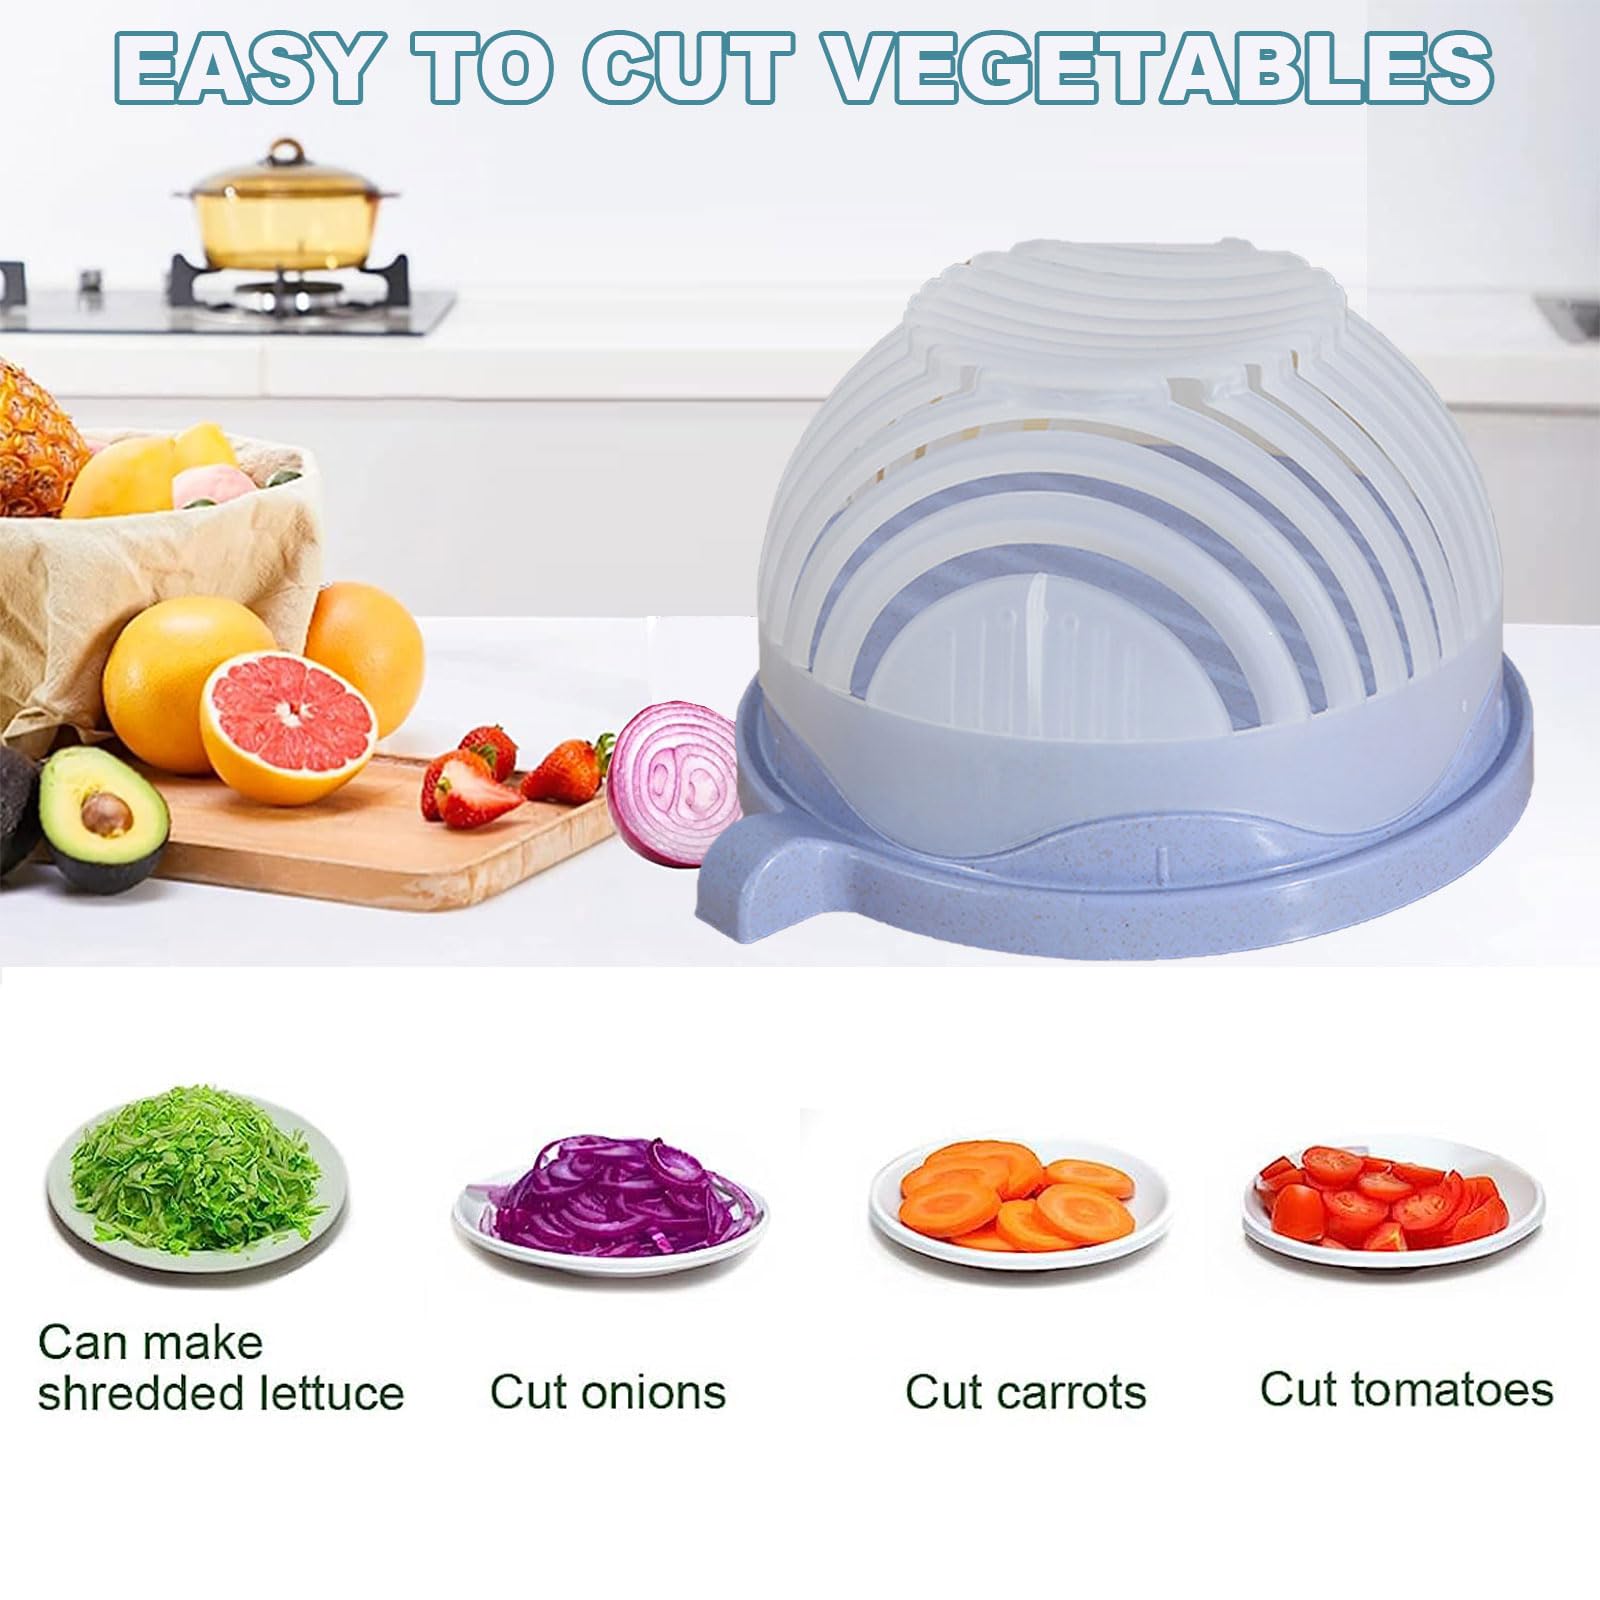 GMPUT Snap Salad Cutter Bowl, Salad Chopper Bowl and Cutter, Multi-Functional Fast Salad Cutter Bowl, Salad Cutter Bowl with Lid Fast Vegetable Cut Set (White)